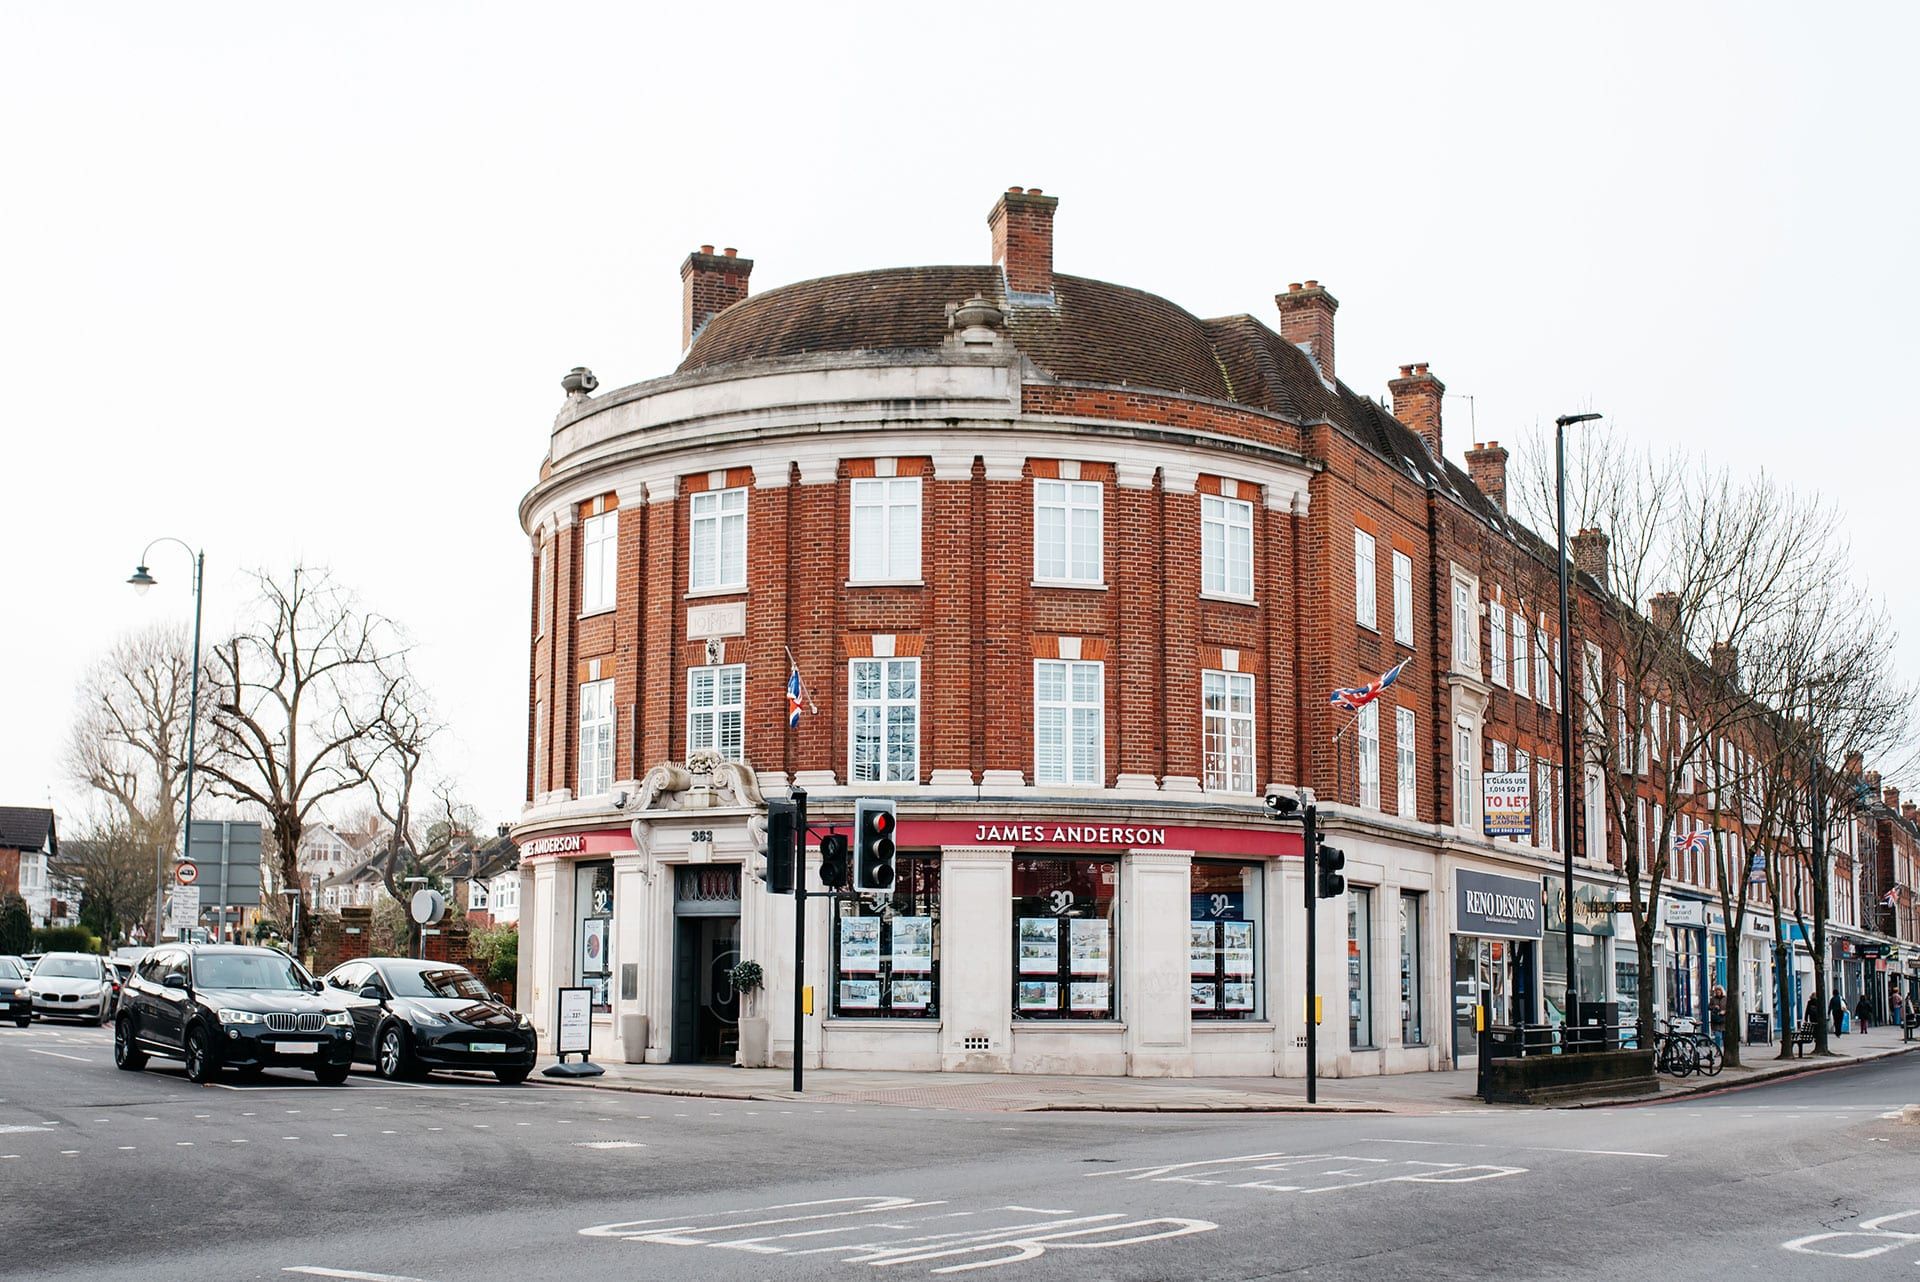 Our East Sheen Office